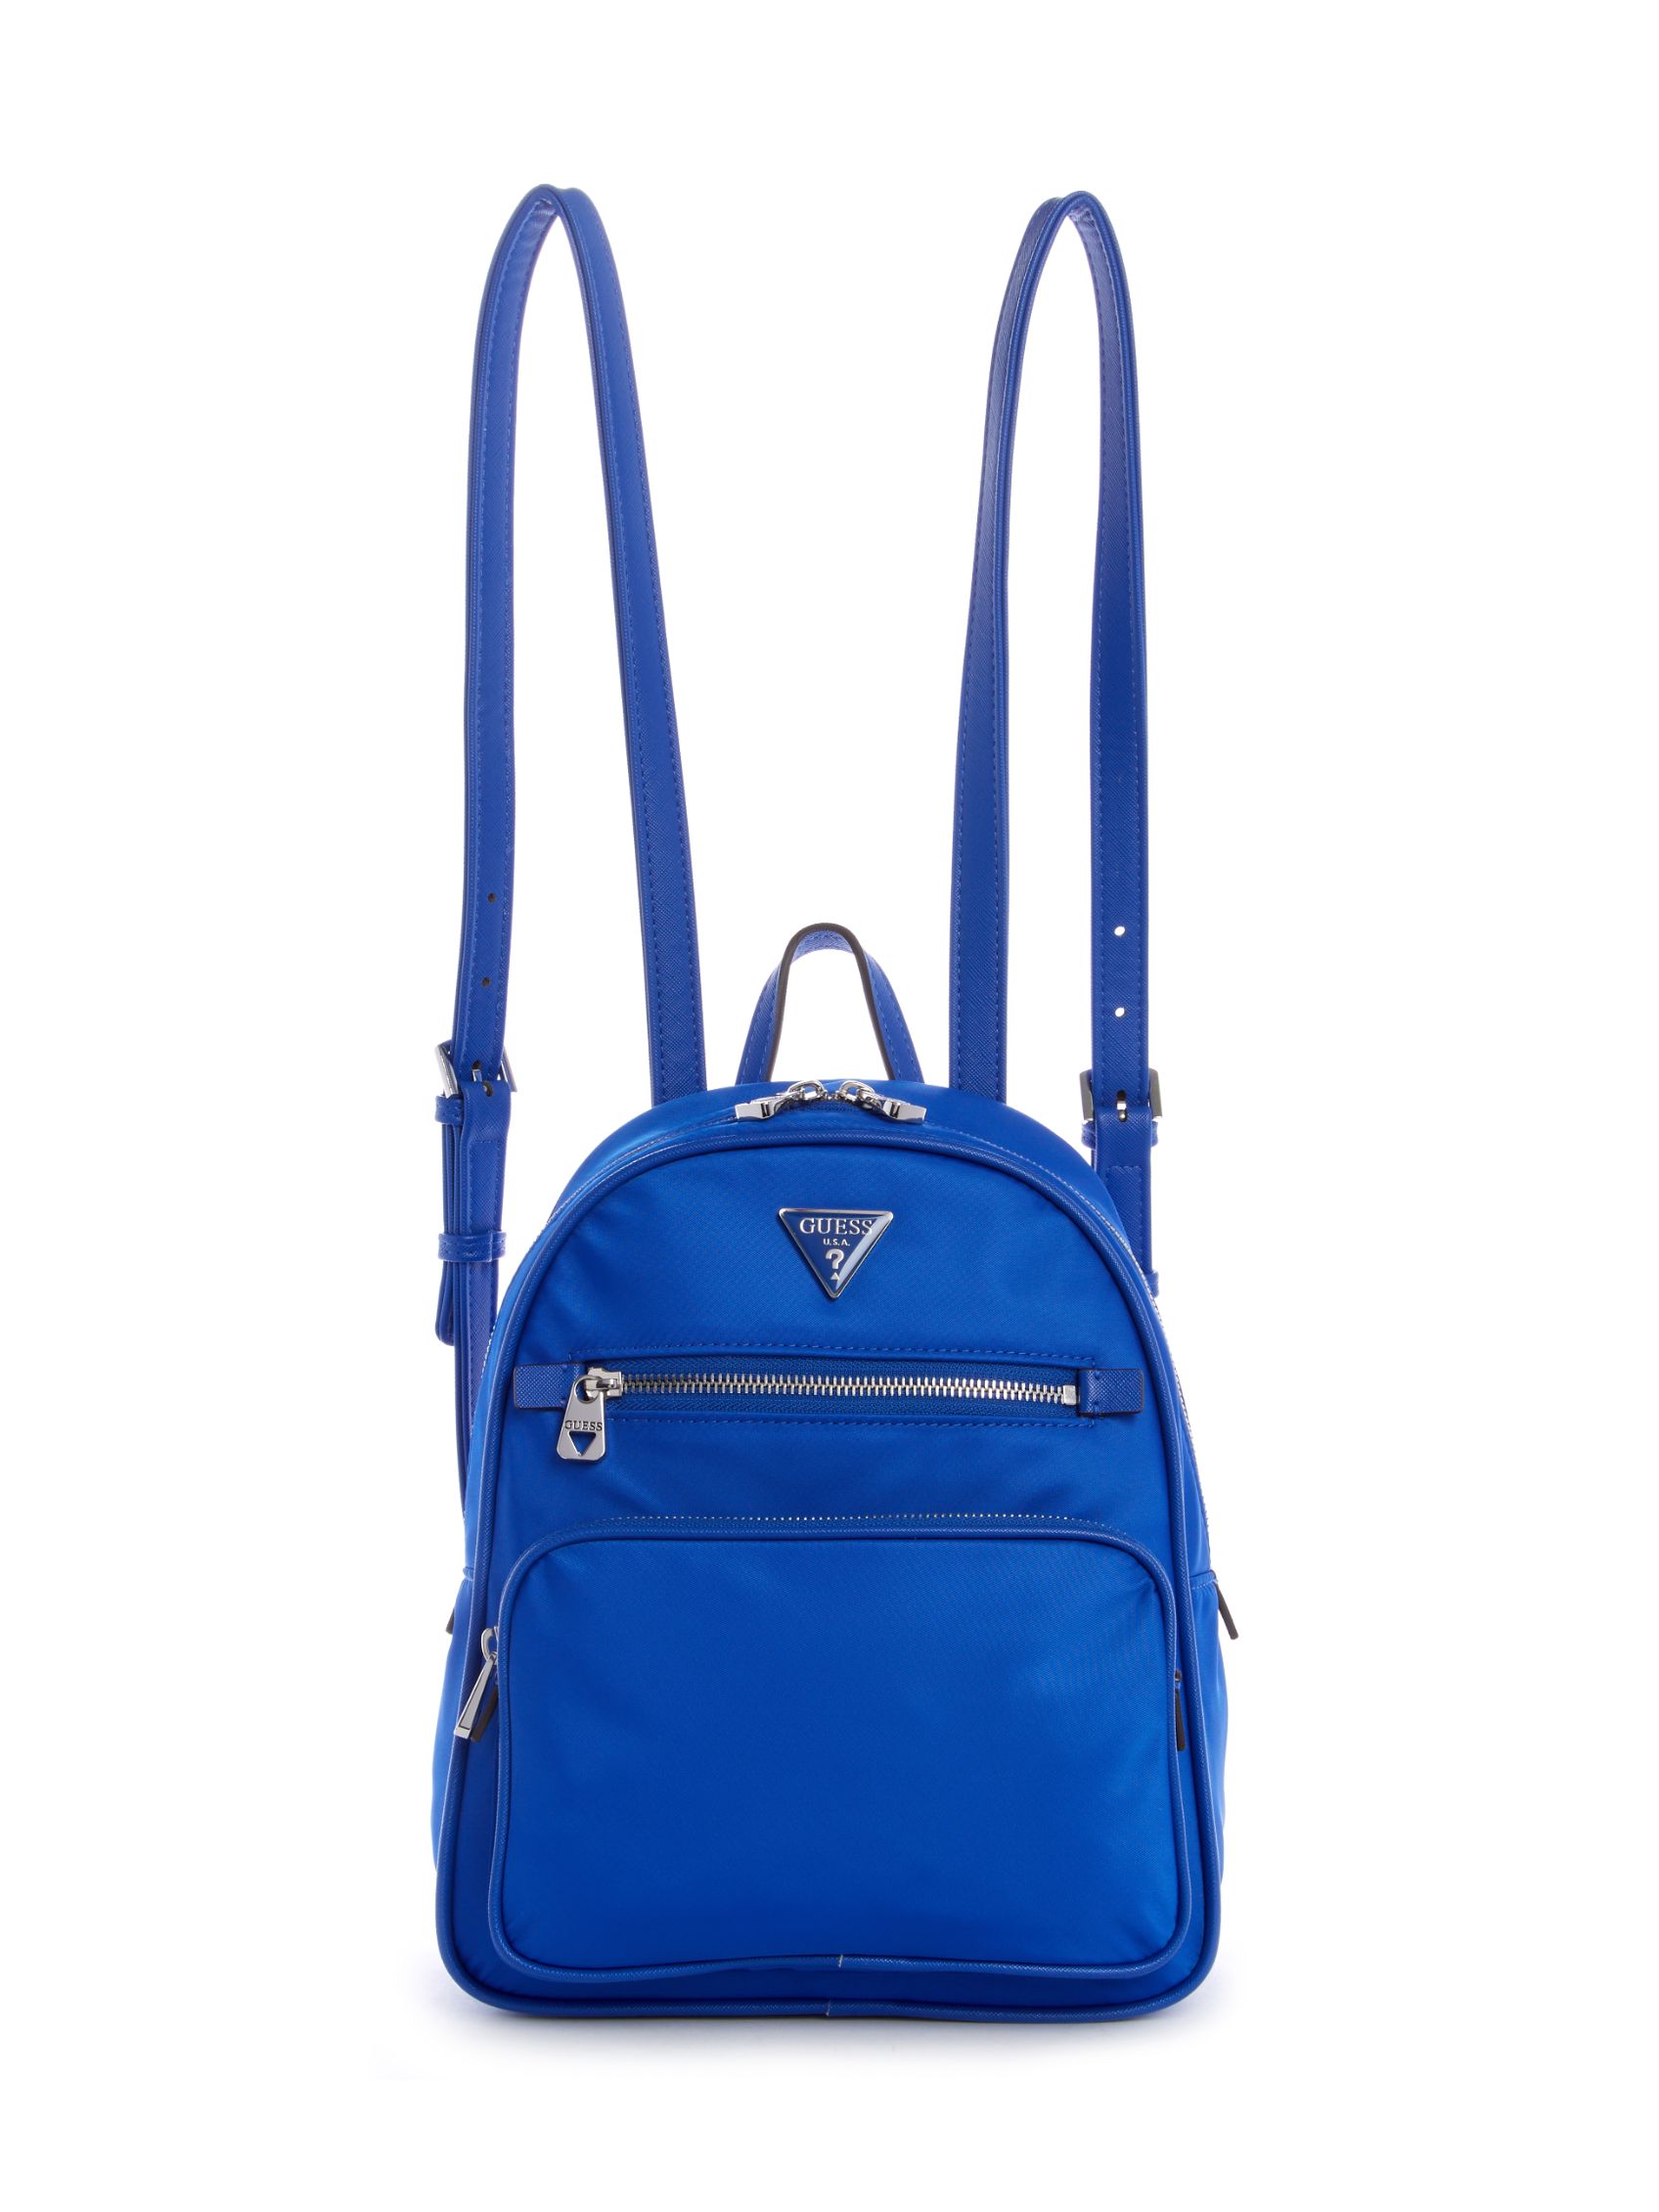 LITTLE BAY BACKPACK | Guess Philippines